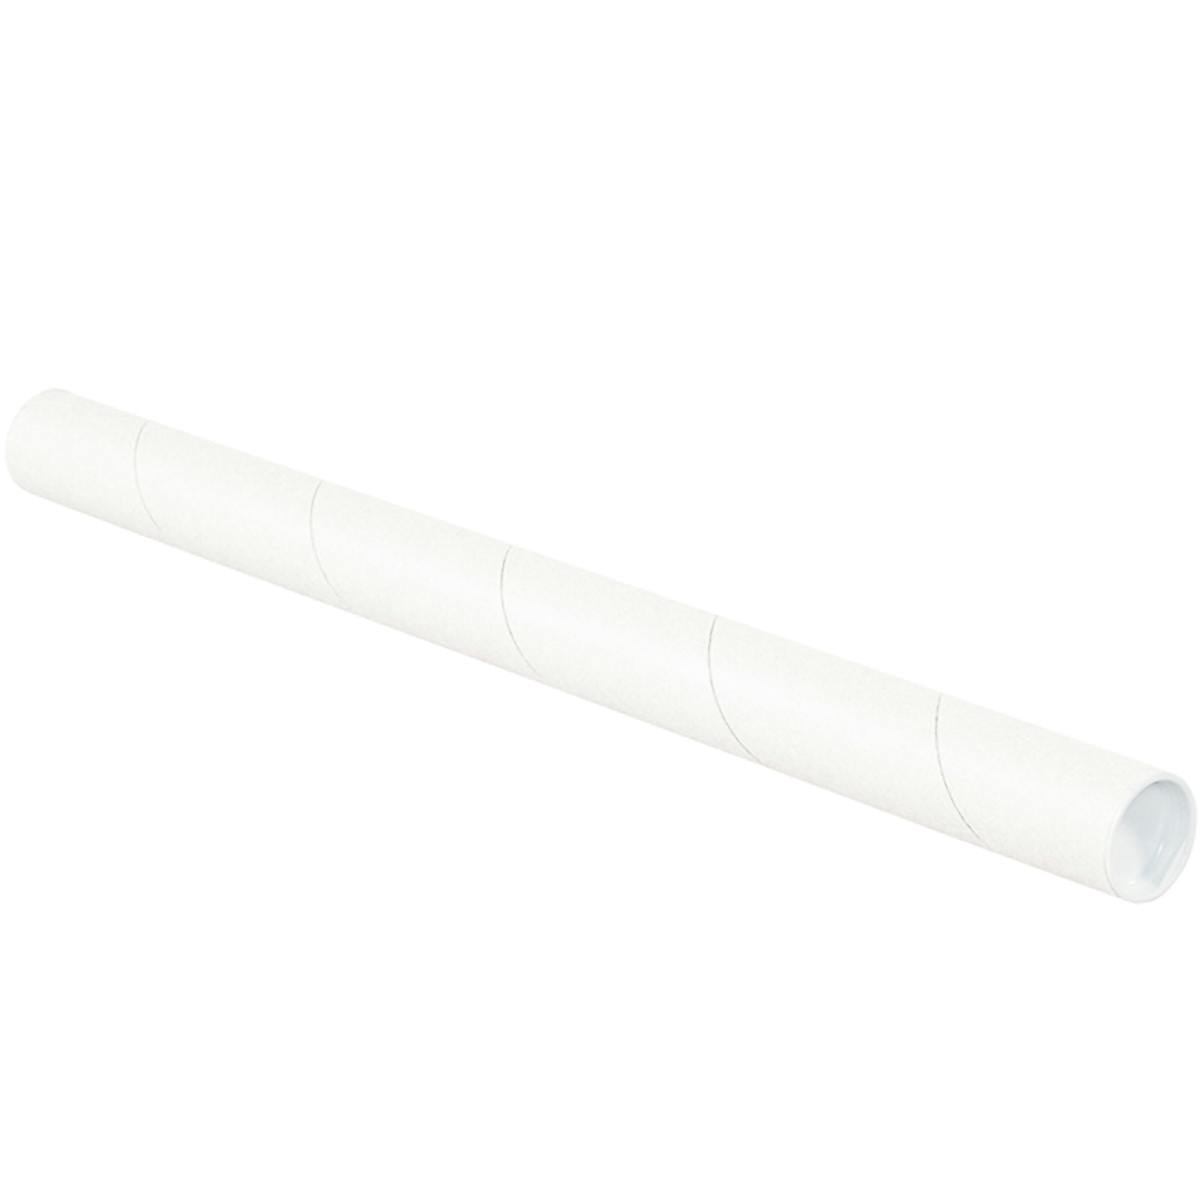 1 1/2 x 18 White Mailing Tubes with Caps